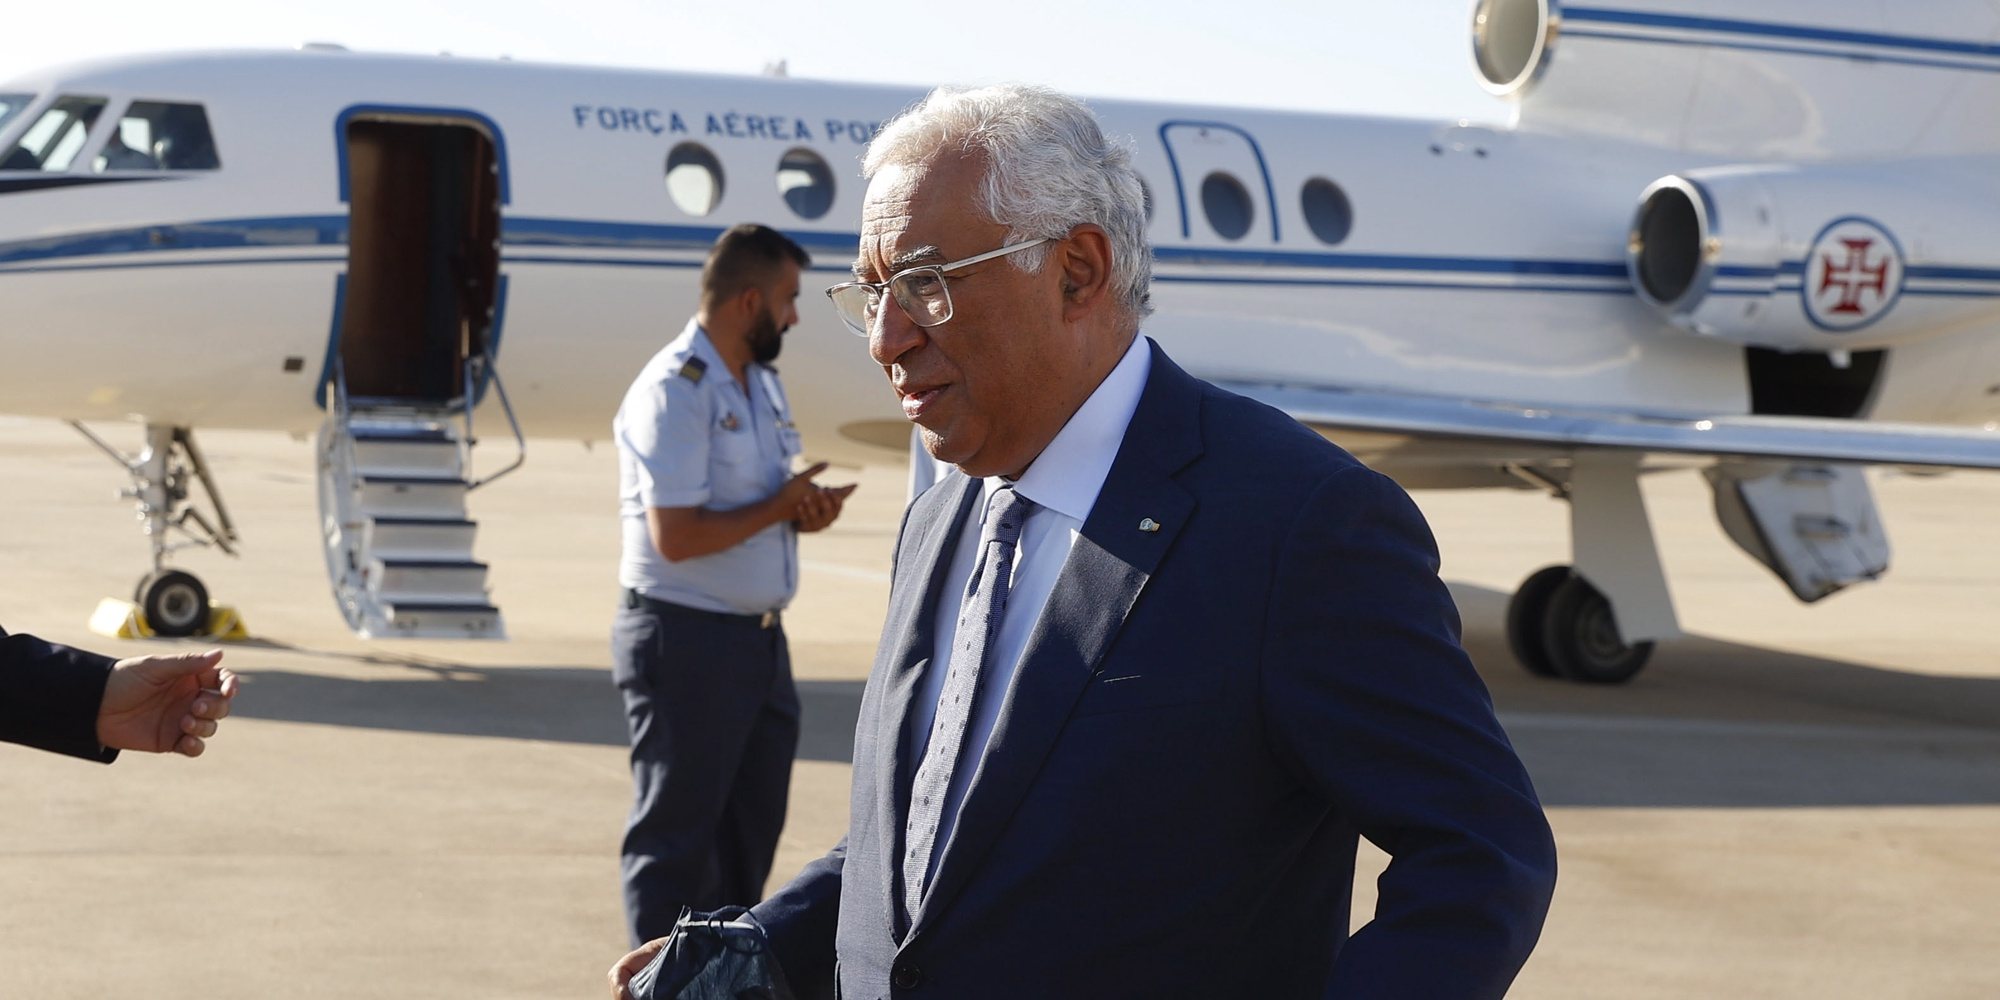 epa10039260 Portuguese Prime Minister, Antonio Costa, arrives at the airbase of Torrejon de Ardoz, in Madrid, Spain, 28 June 2022. Heads of State and Government from NATO&#039;s member countries and key partners are gathering in Madrid to discuss important issues facing the Alliance and endorse NATO&#039;s new Strategic Concept, the Organization said.  EPA/J.J. Guillen / POOL POOL